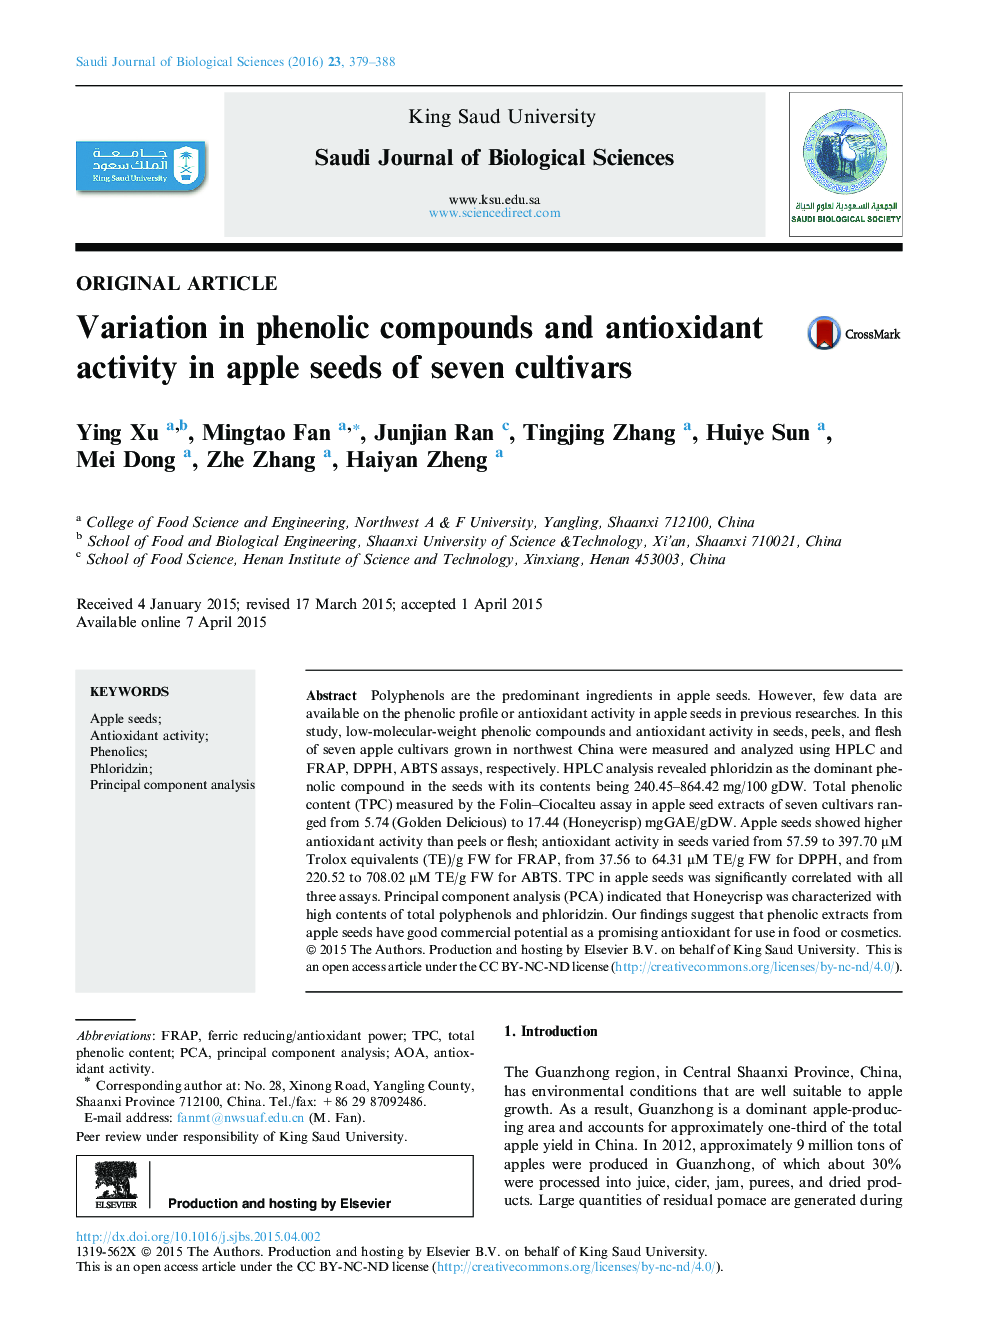 Variation in phenolic compounds and antioxidant activity in apple seeds of seven cultivars 